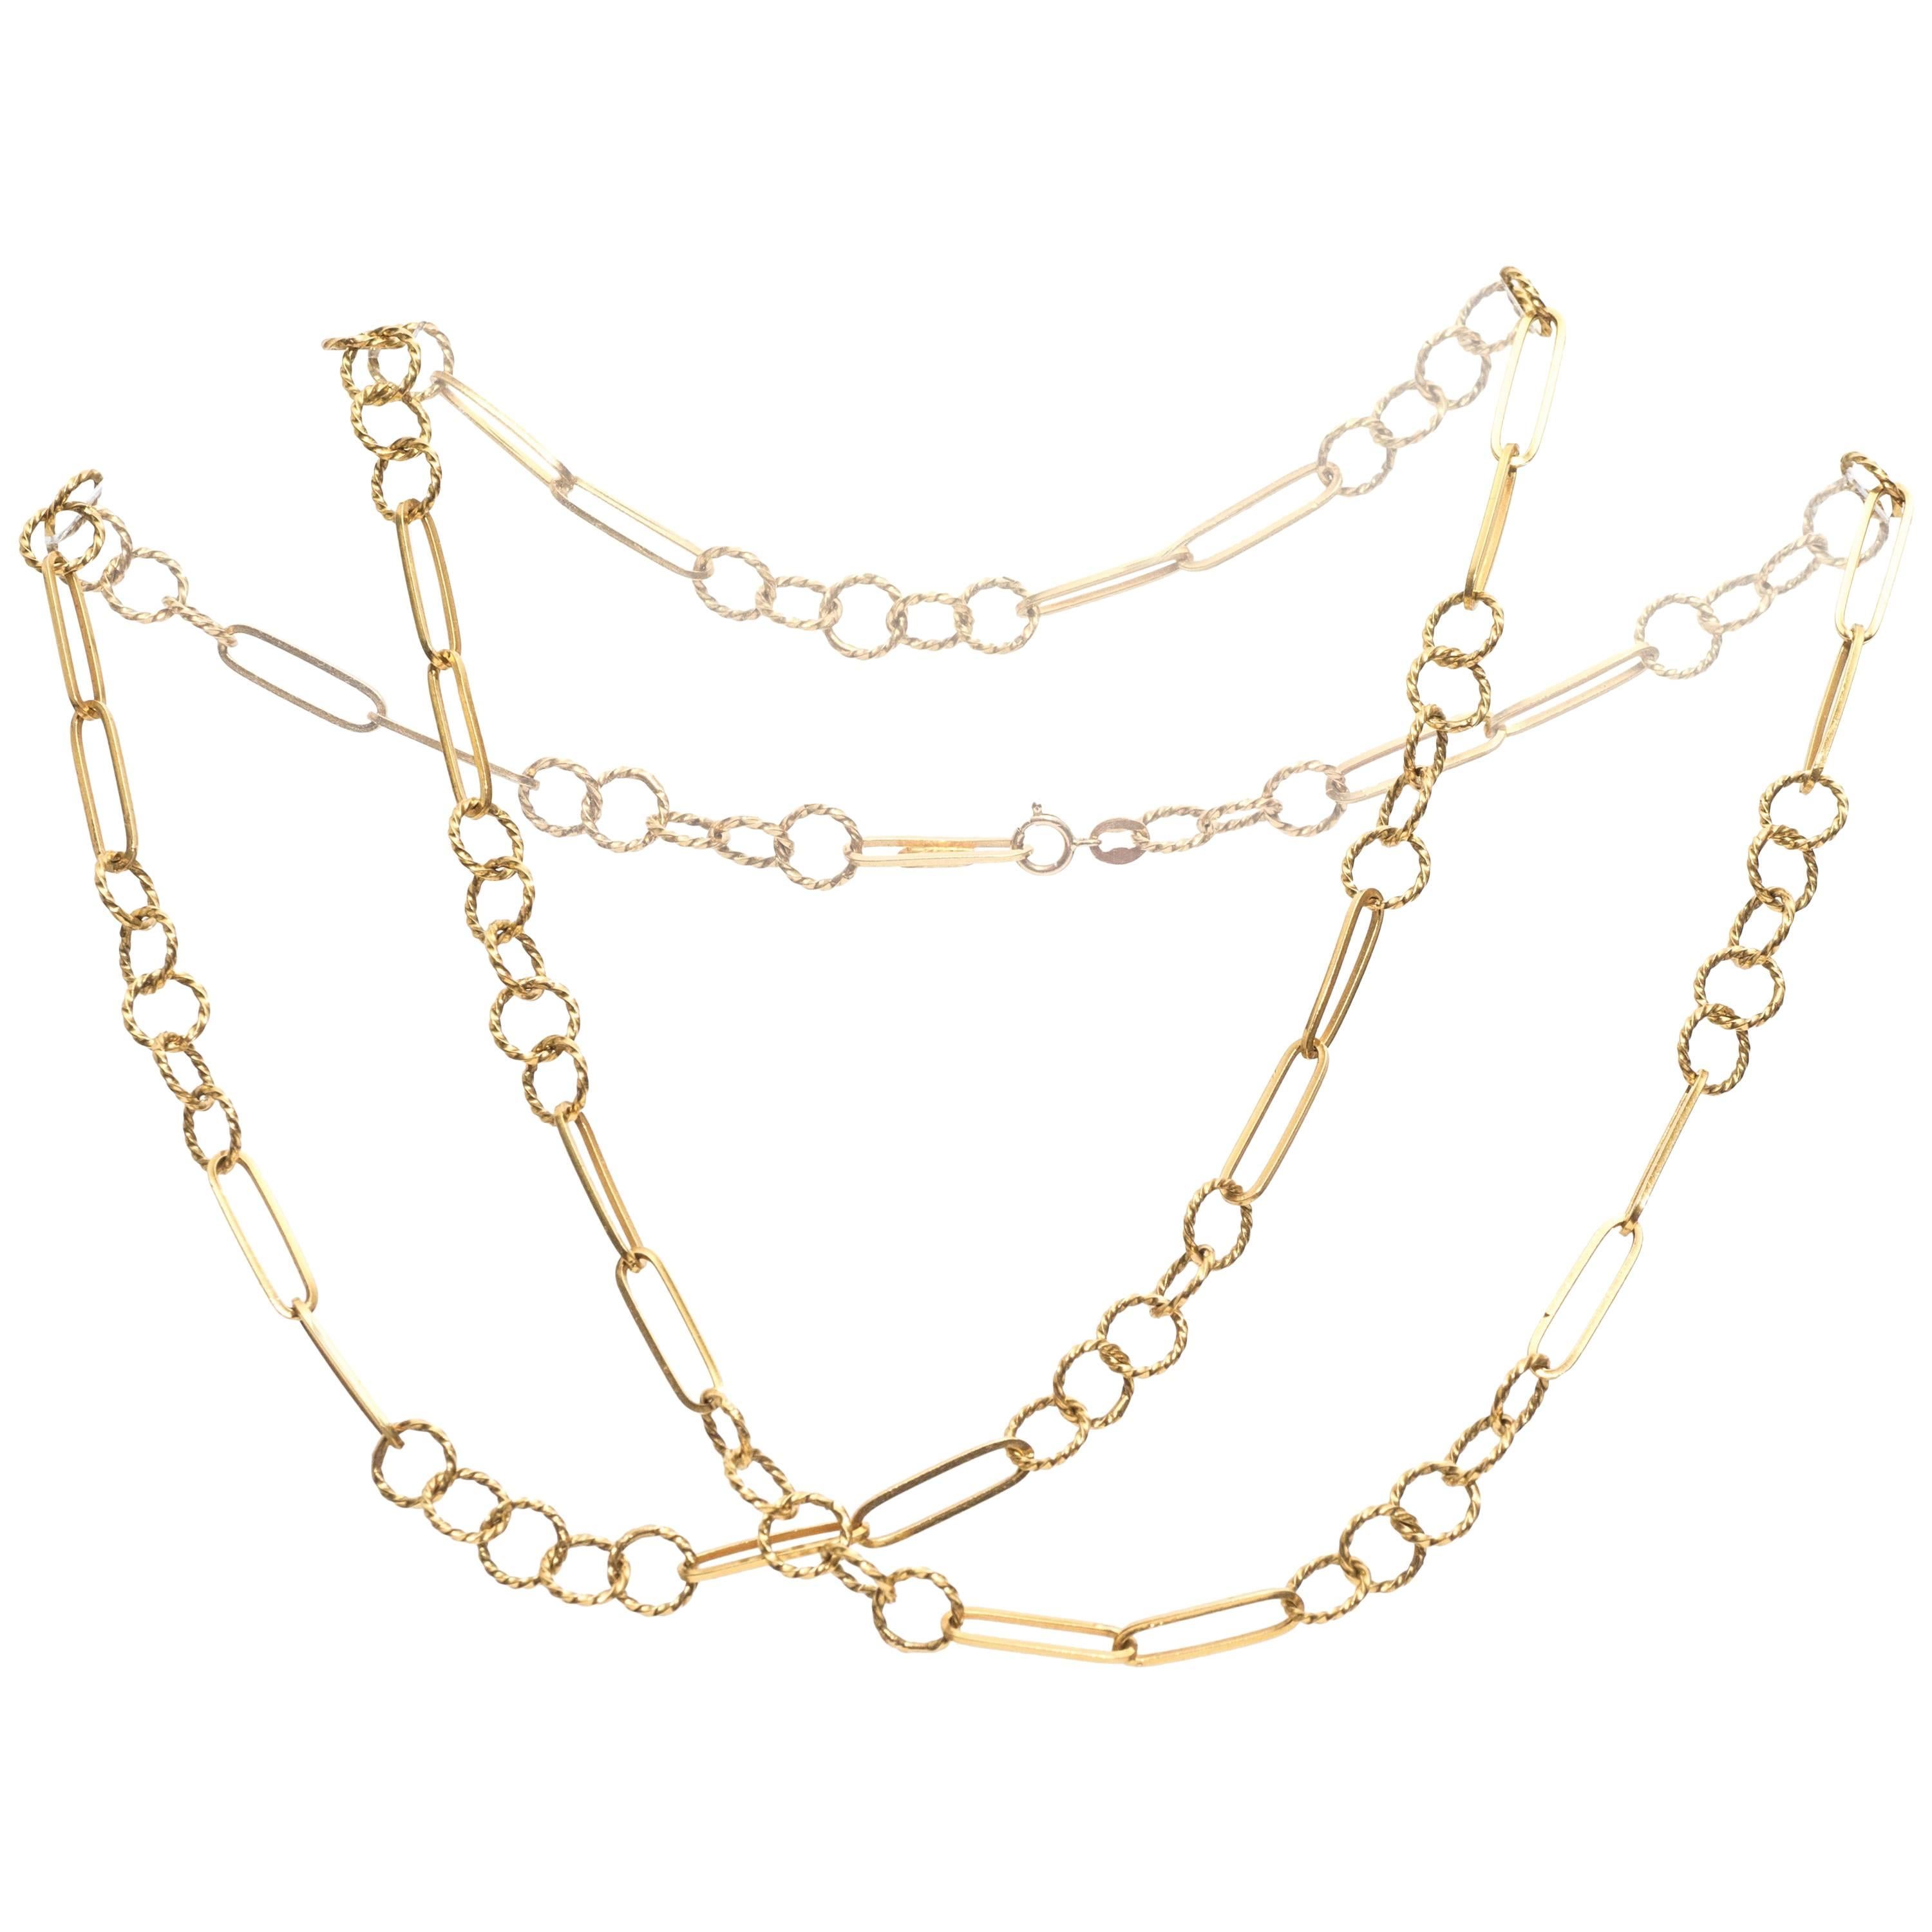 1950s Tiffany & Co. Gold Necklace